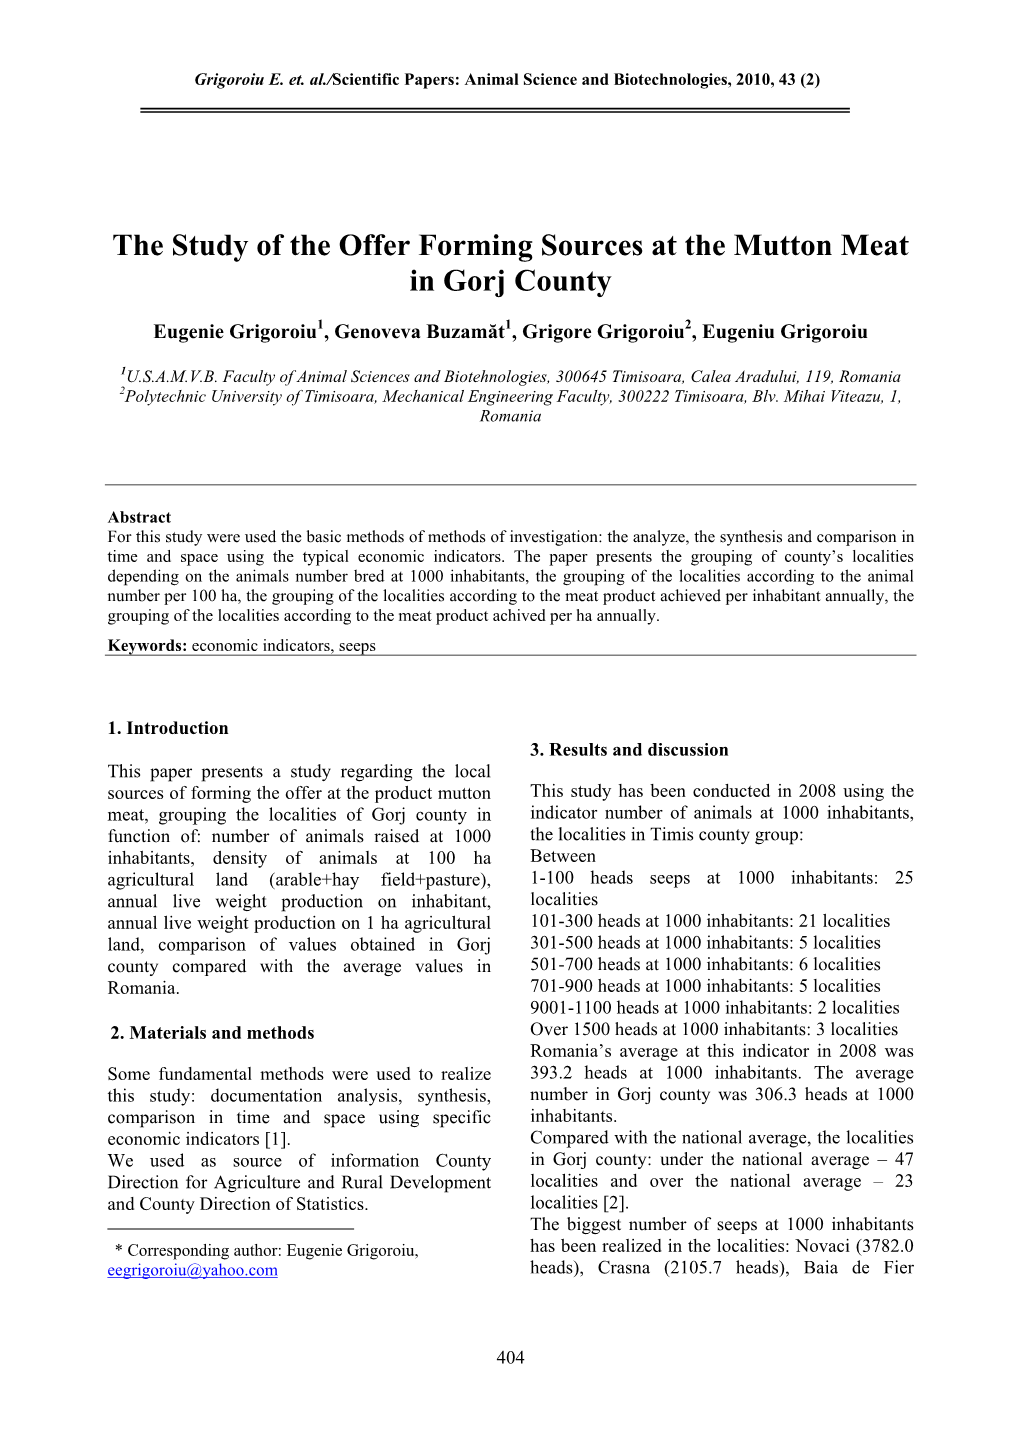 The Study of the Offer Forming Sources at the Mutton Meat in Gorj County